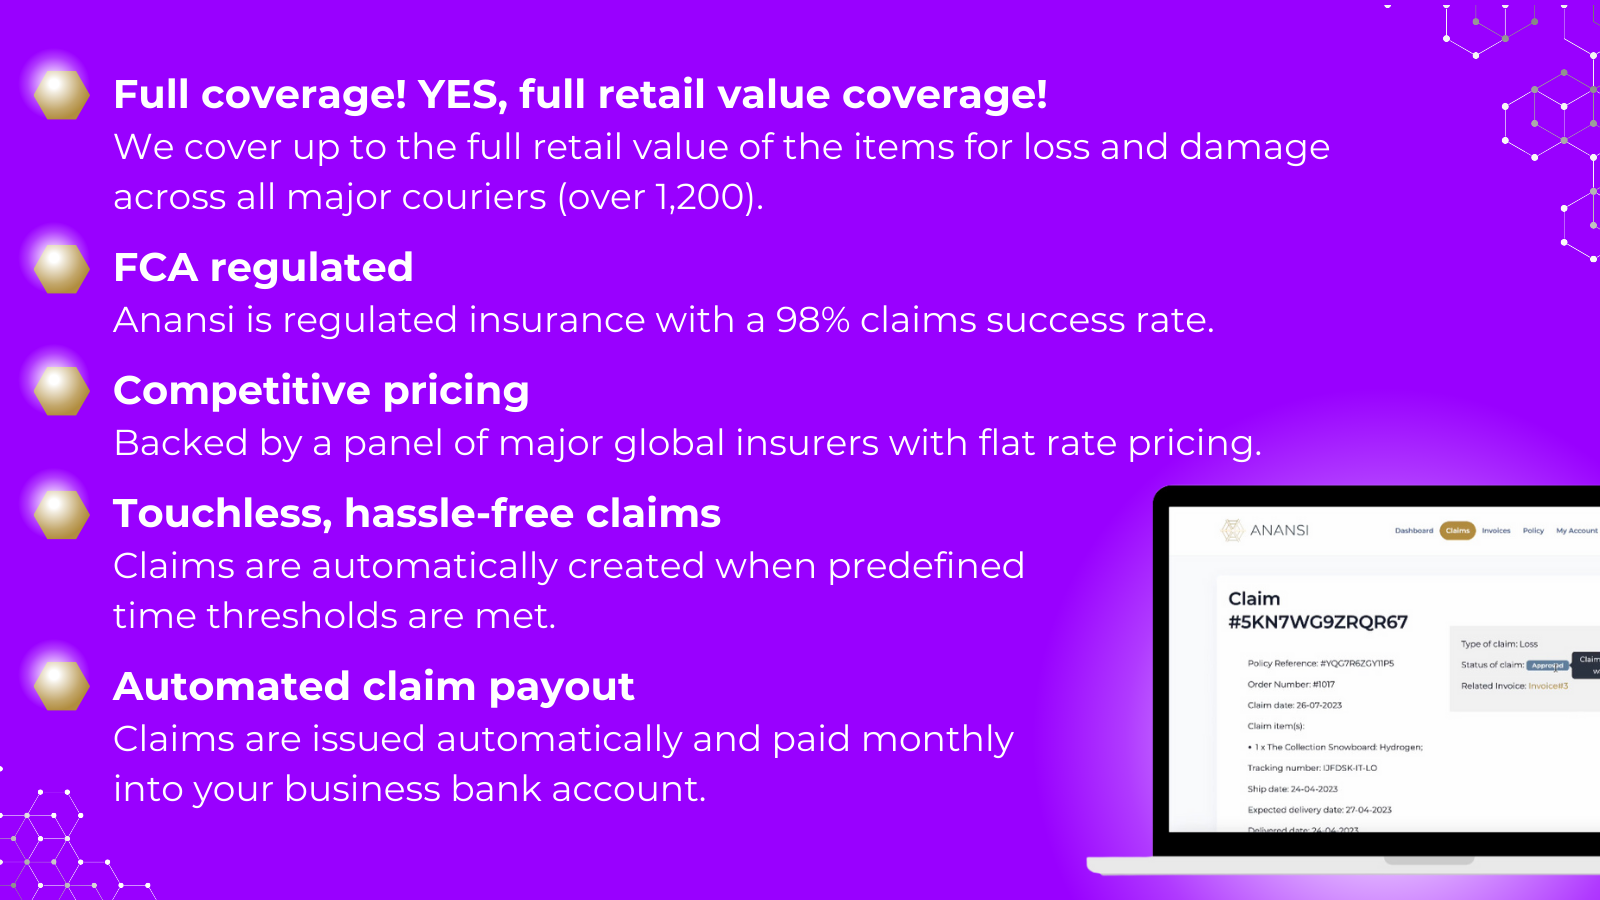 Overview of the insurance